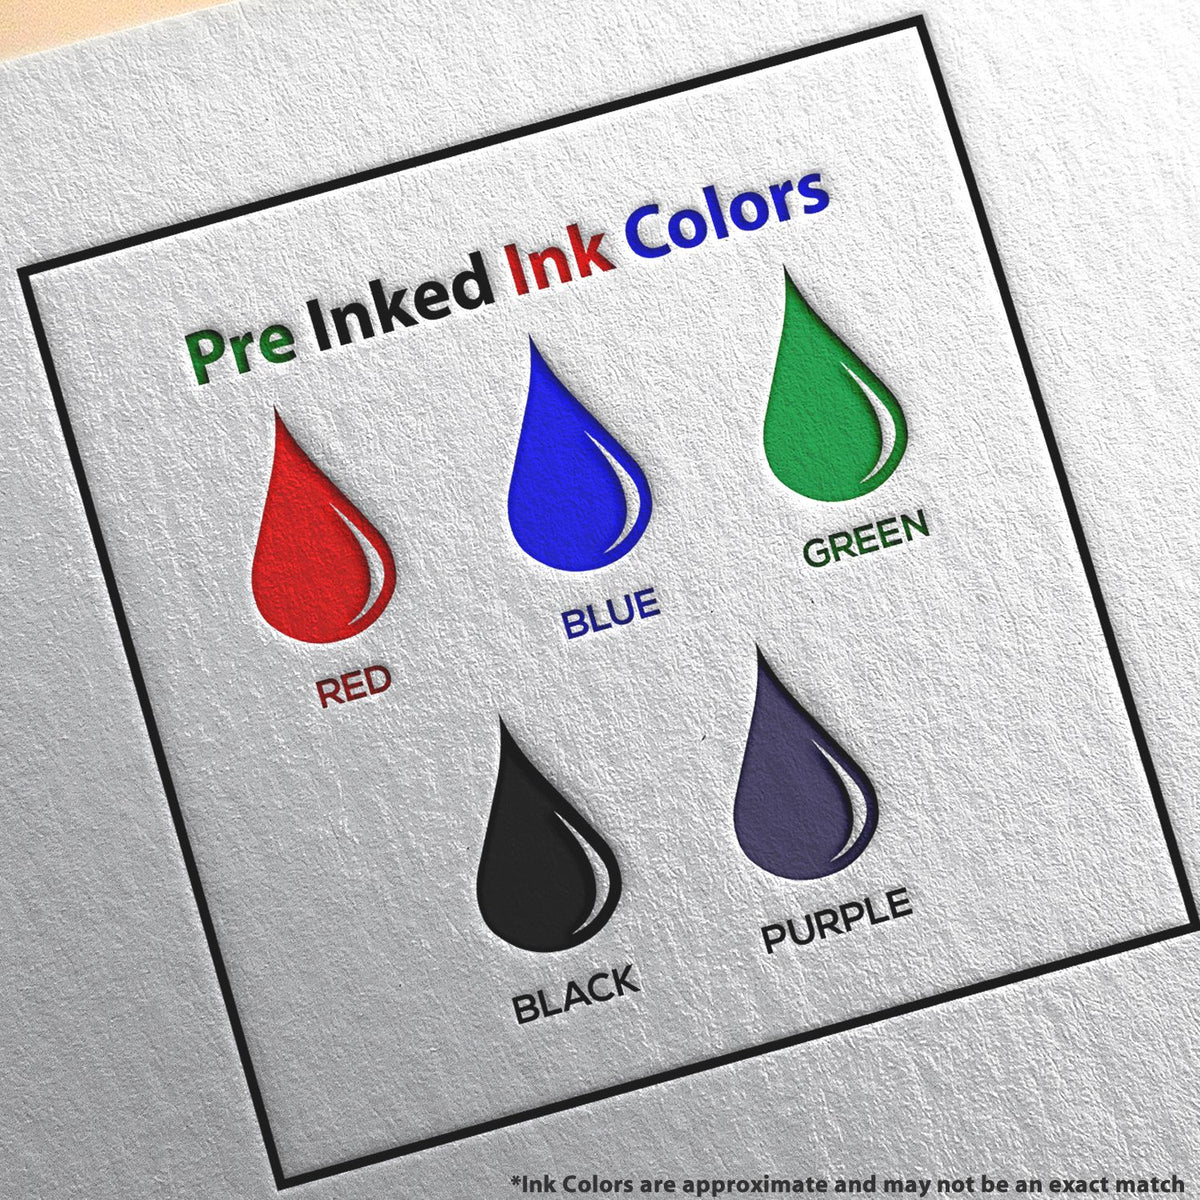 A picture showing the different ink colors or hues available for the Slim Pre-Inked South Carolina Land Surveyor Seal Stamp product.